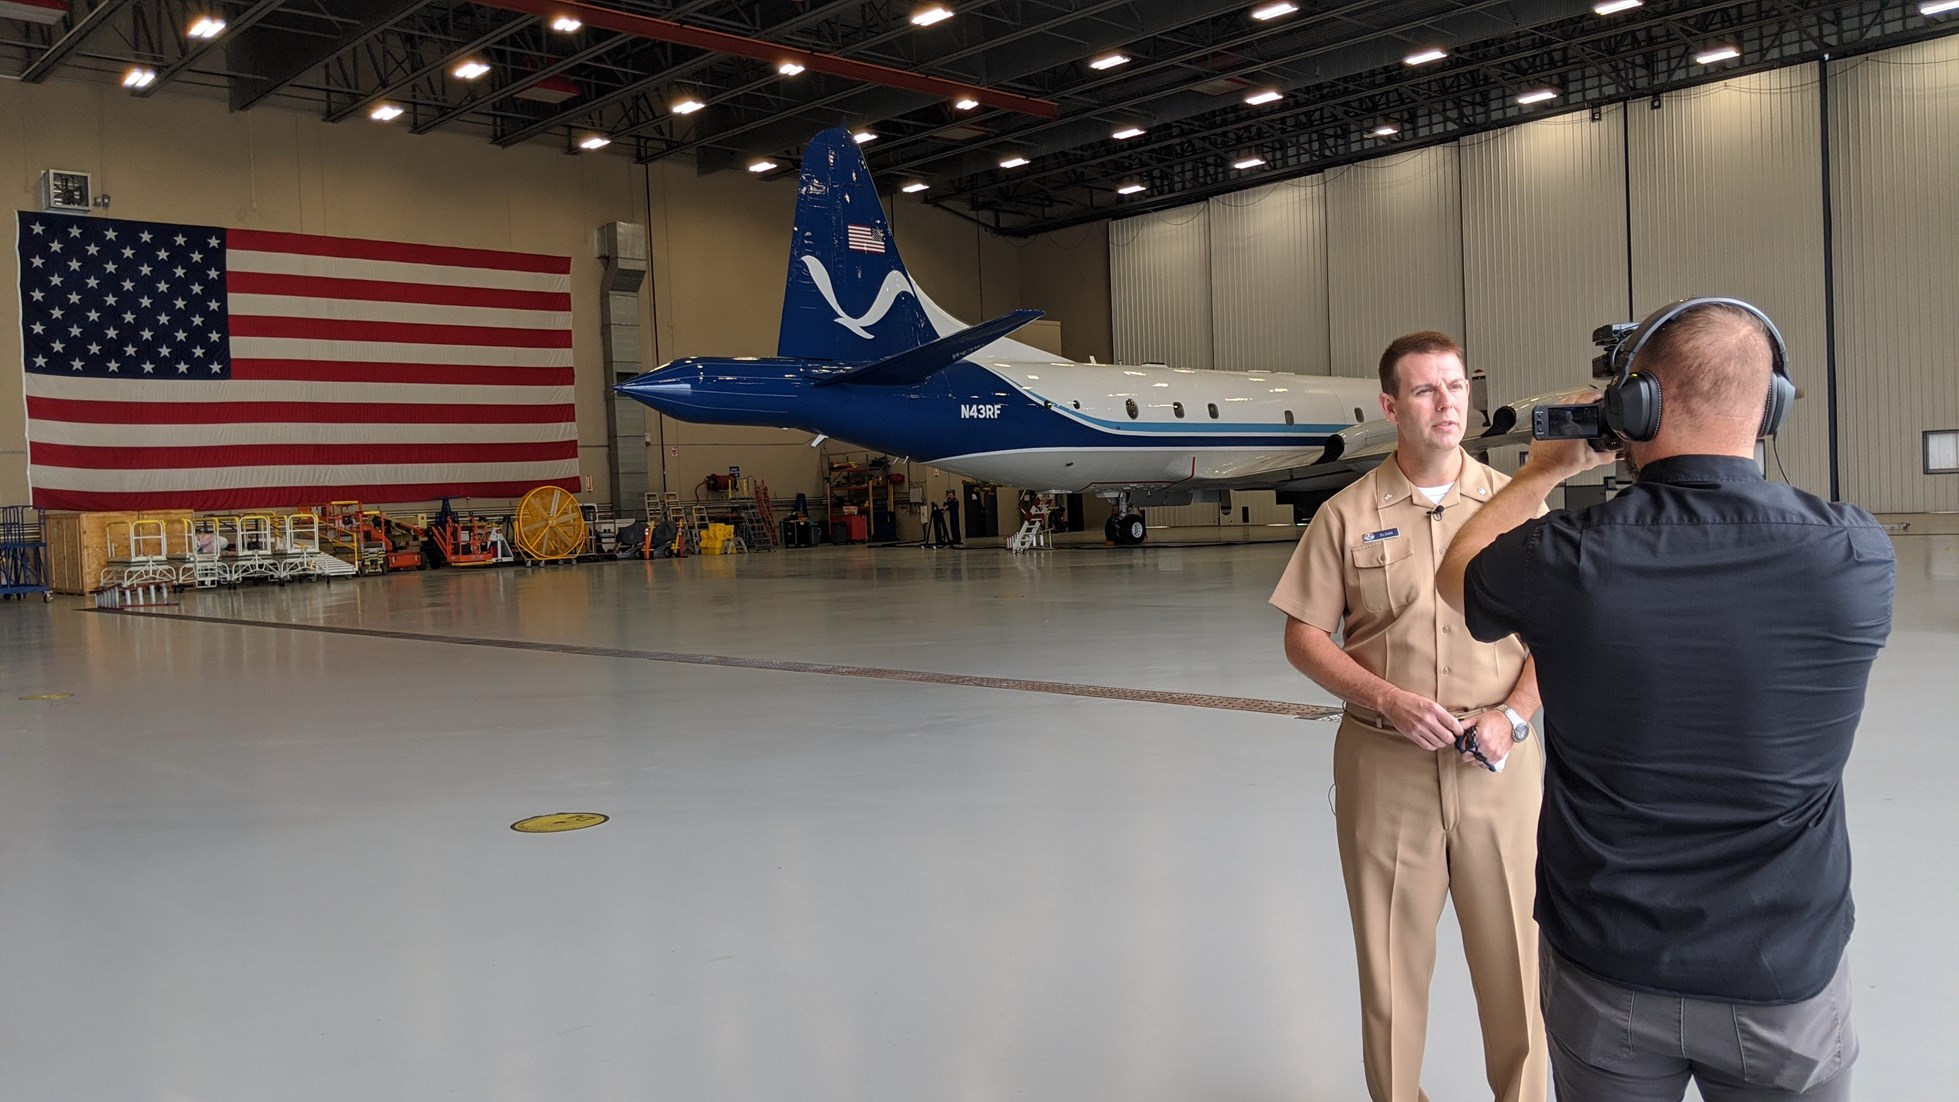 Pilot Sloane being interviewed at the NOAA Hurricane Hunters Hangar at Lakeland Linder Int'l Airport with plane and American flag in background